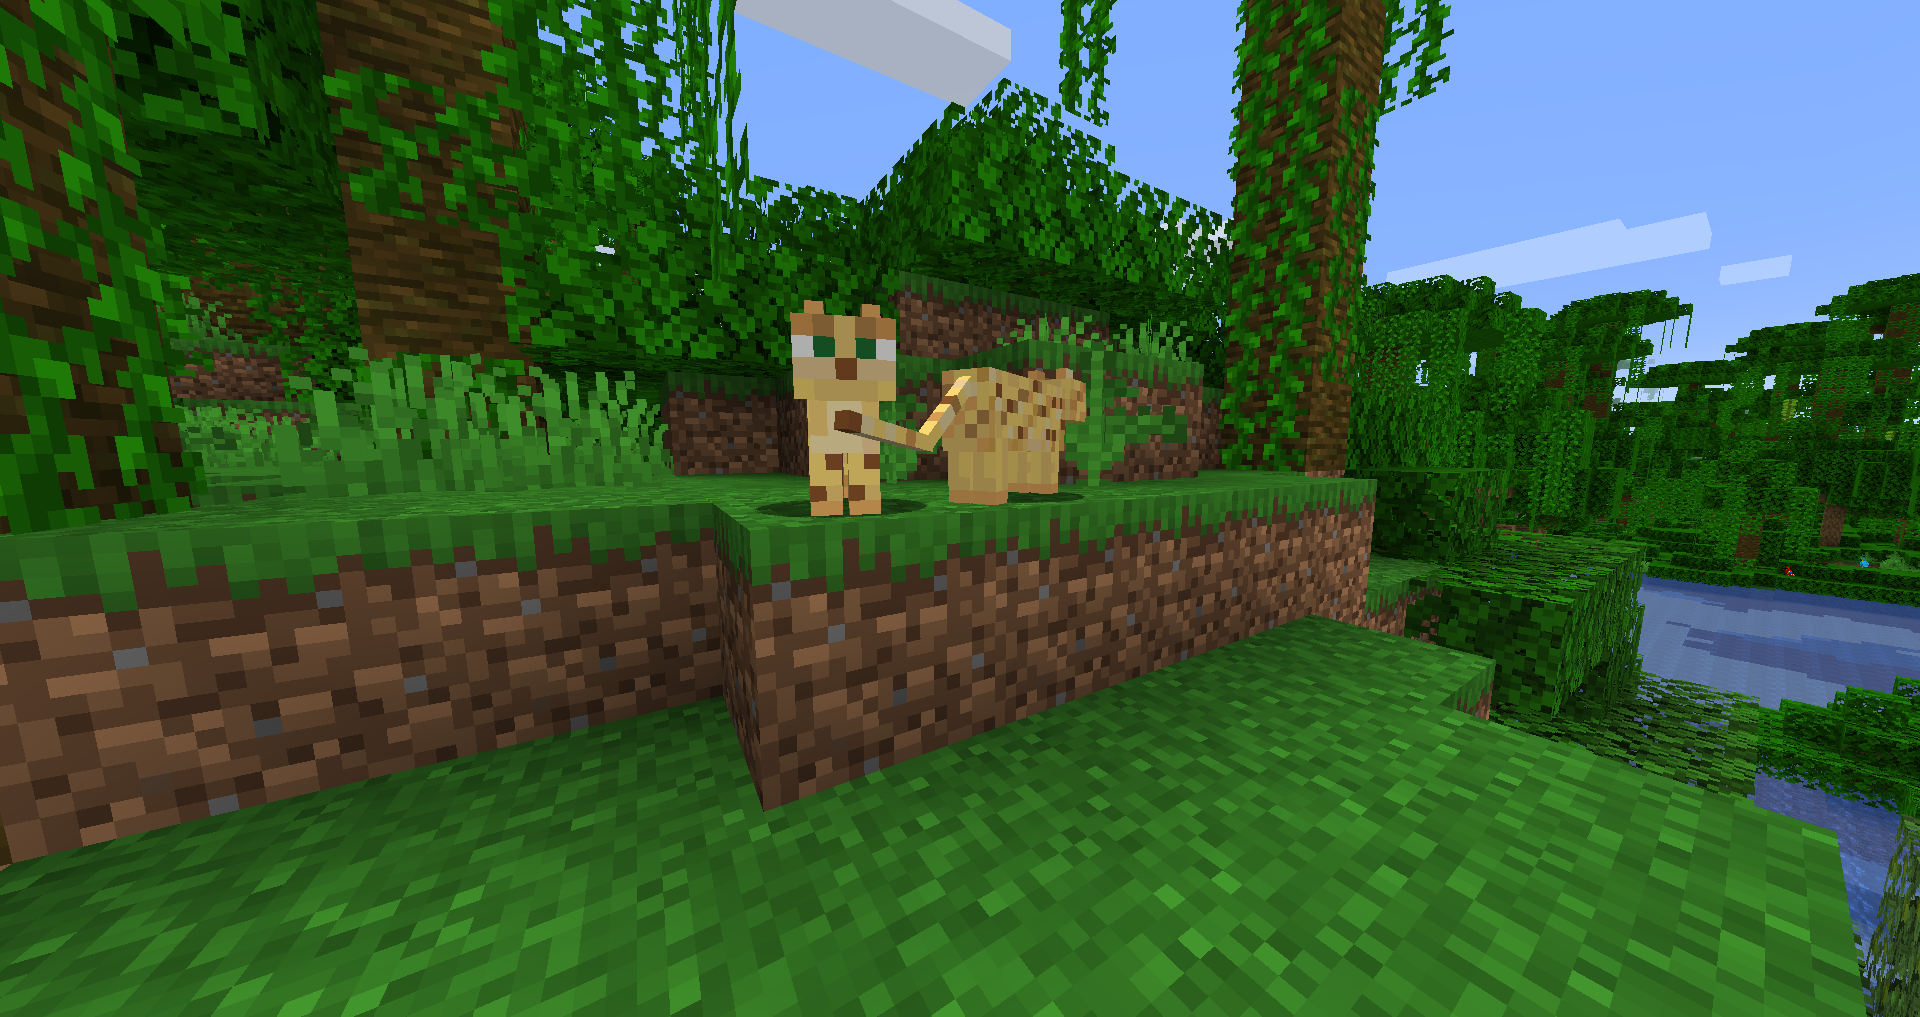 Why are ocelots and cats considered hostile mobs?